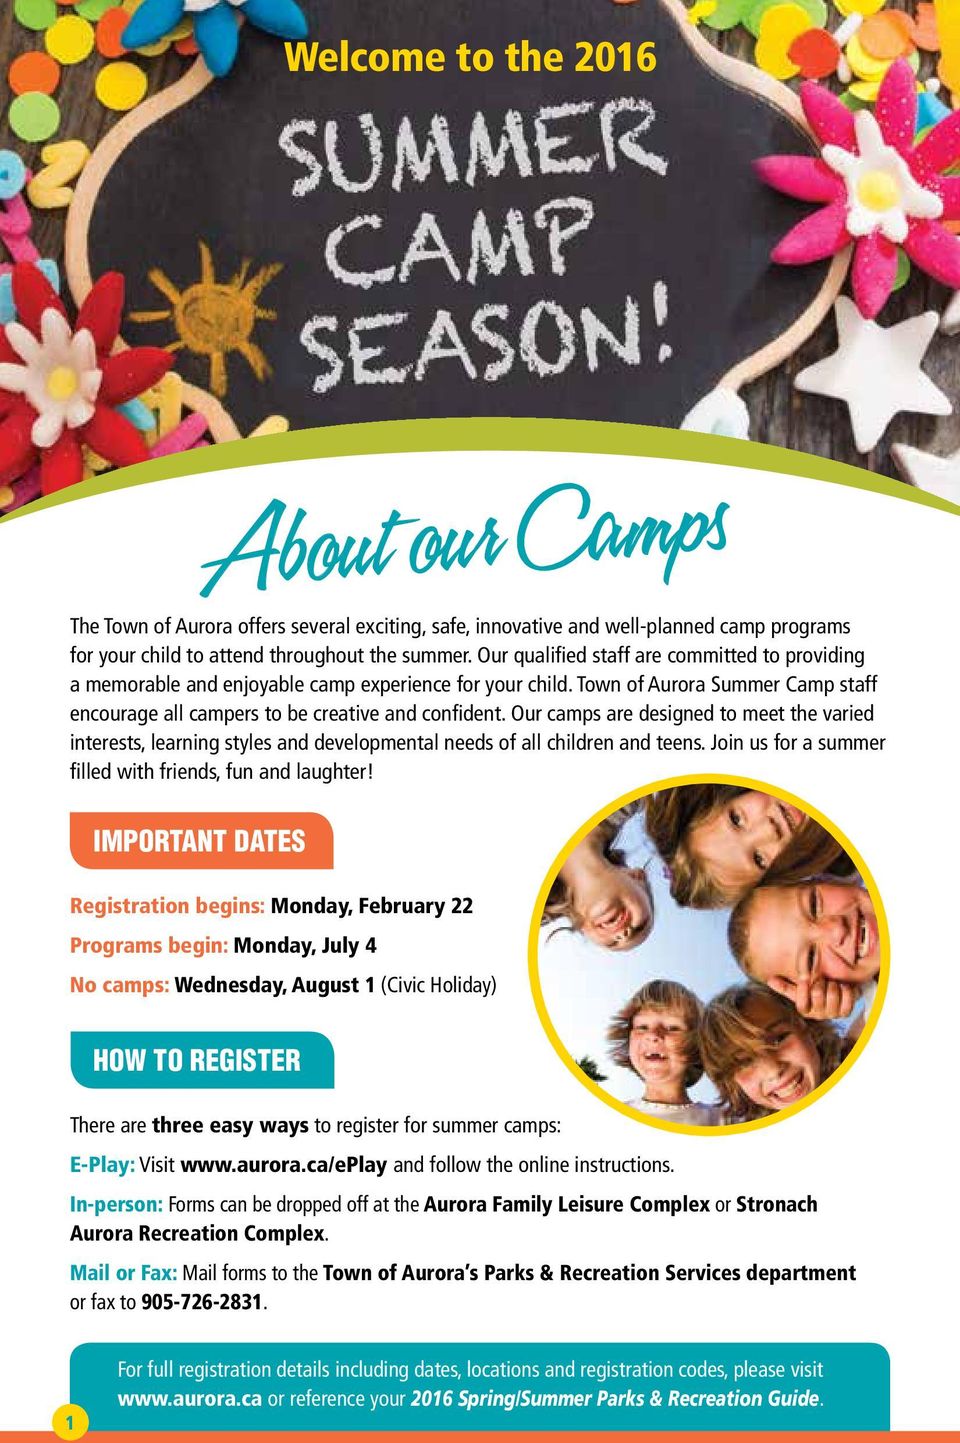 Our camps are designed to meet the varied interests, learning styles and developmental needs of all children and teens. Join us for a summer filled with friends, fun and laughter!